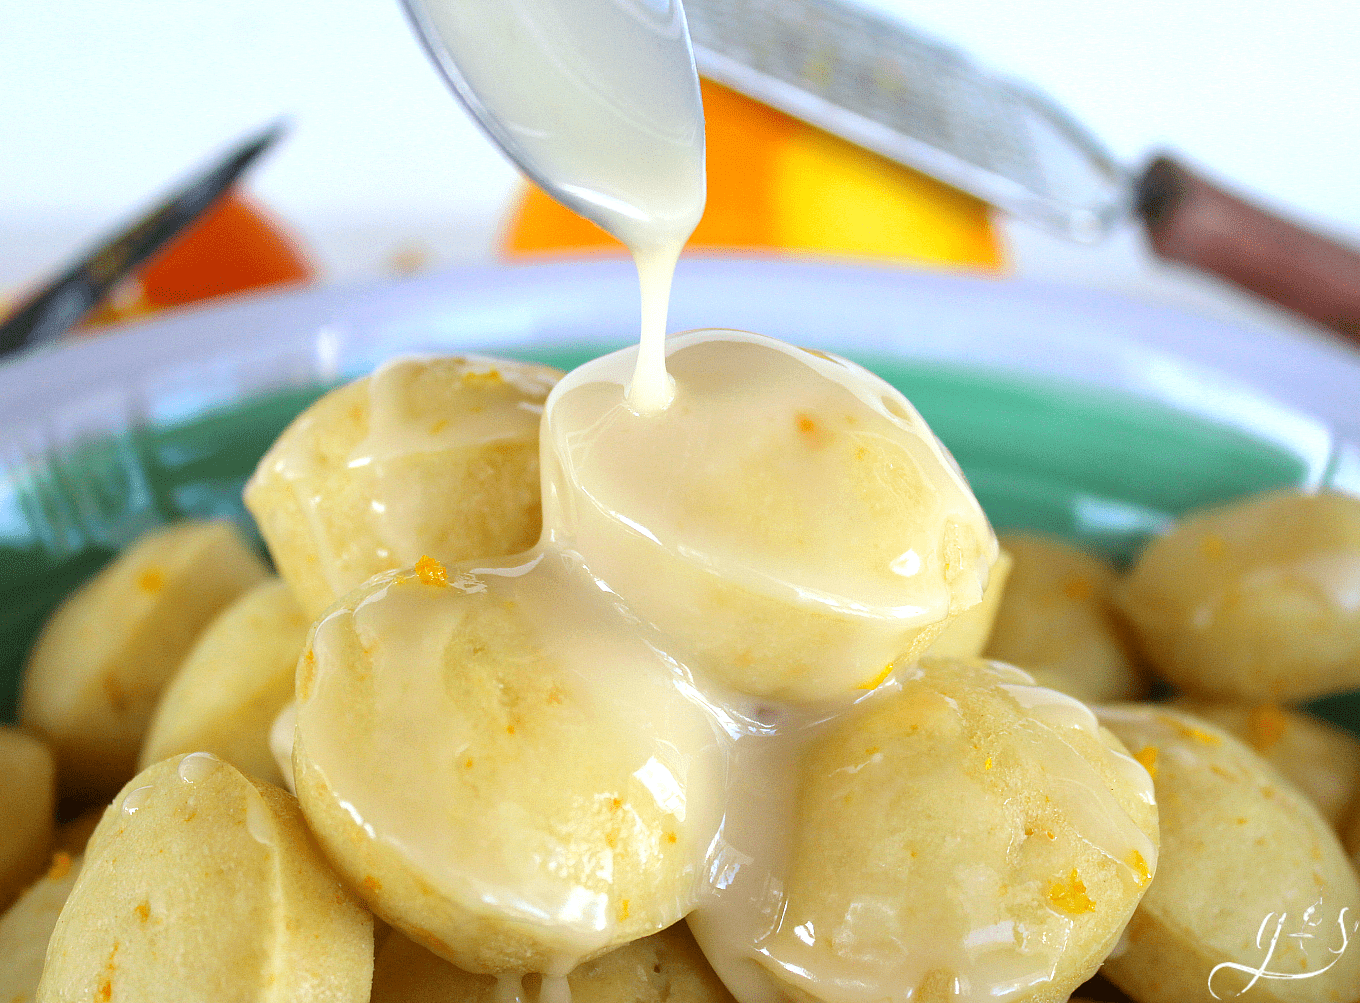 The BEST Baked Creamsicle Mini Pancake Muffins | This easy and from scratch recipe is perfect for breakfast or brunch! Healthy whole wheat flour batter and 3 ingredient fresh orange syrup will brighten your day. These homemade fluffy bites are easy for kids or toddlers to eat with syrup. Just add an egg for protein! Freezer friendly and easily adaptable to be gluten-free too. 